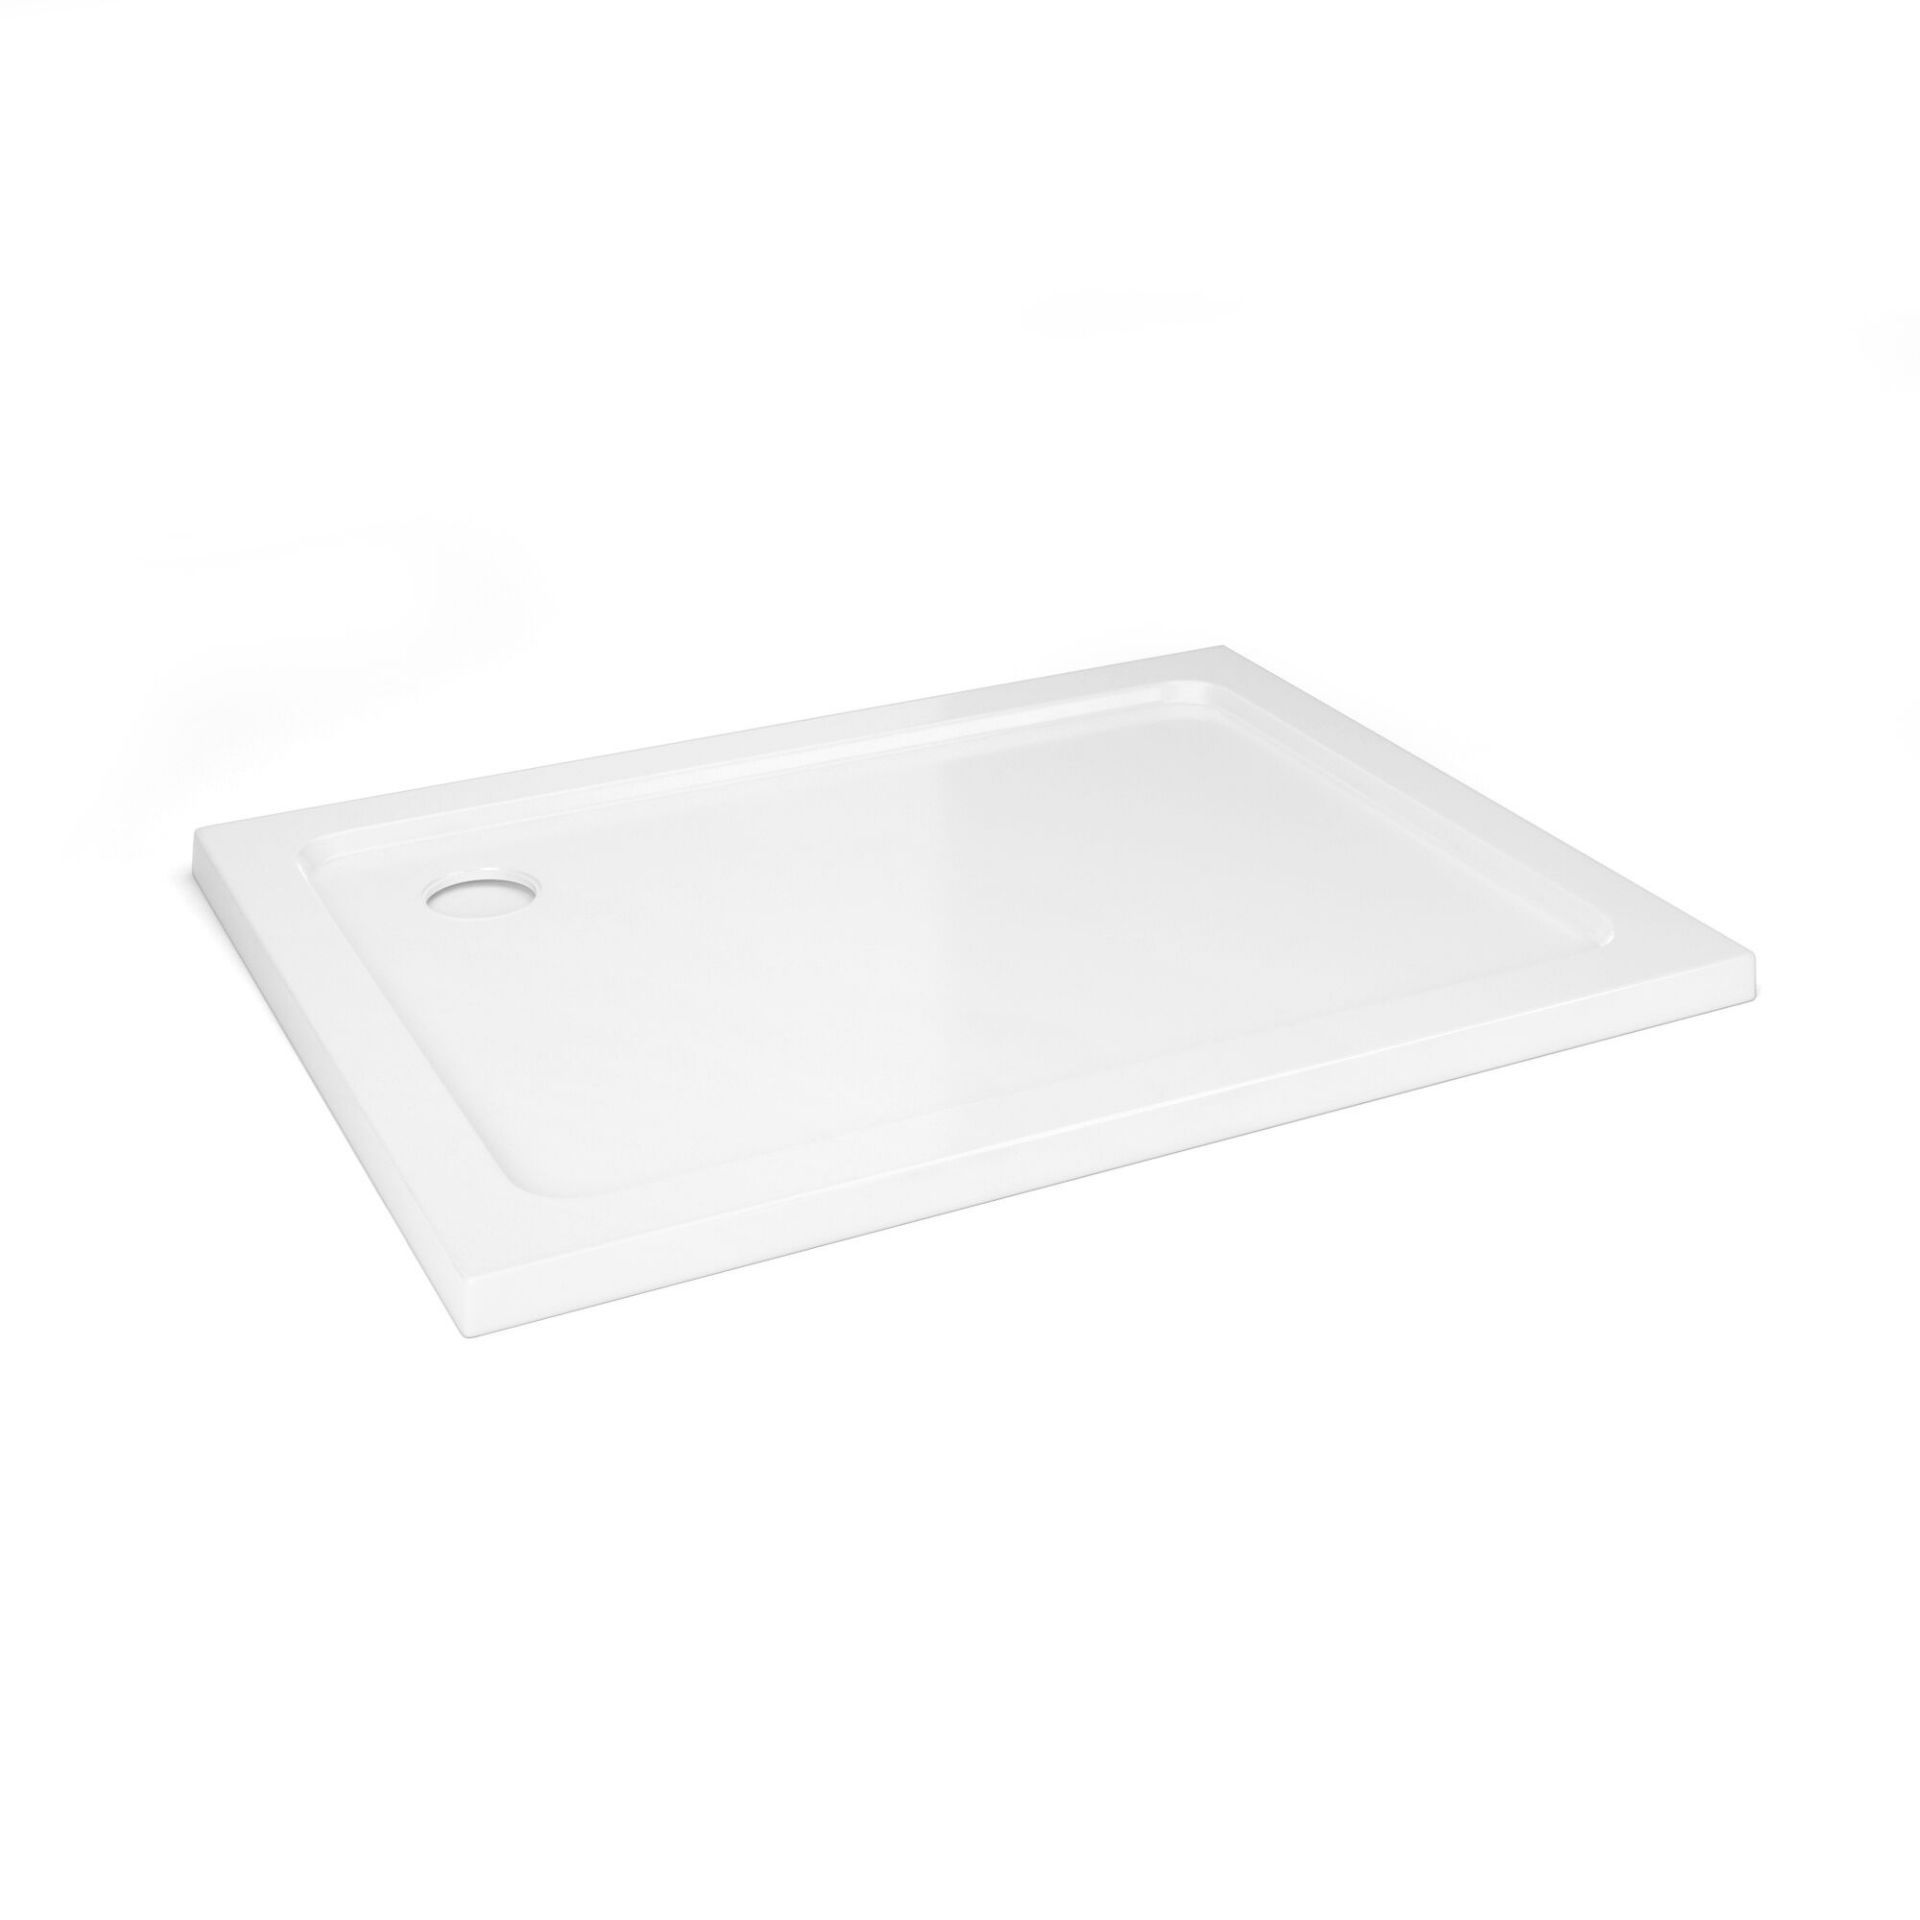 NEW 1000x800mm Rectangular Stone Shower Tray - Ultra Slim.RRP £299.99.Low profile ultra slim d... - Image 3 of 3